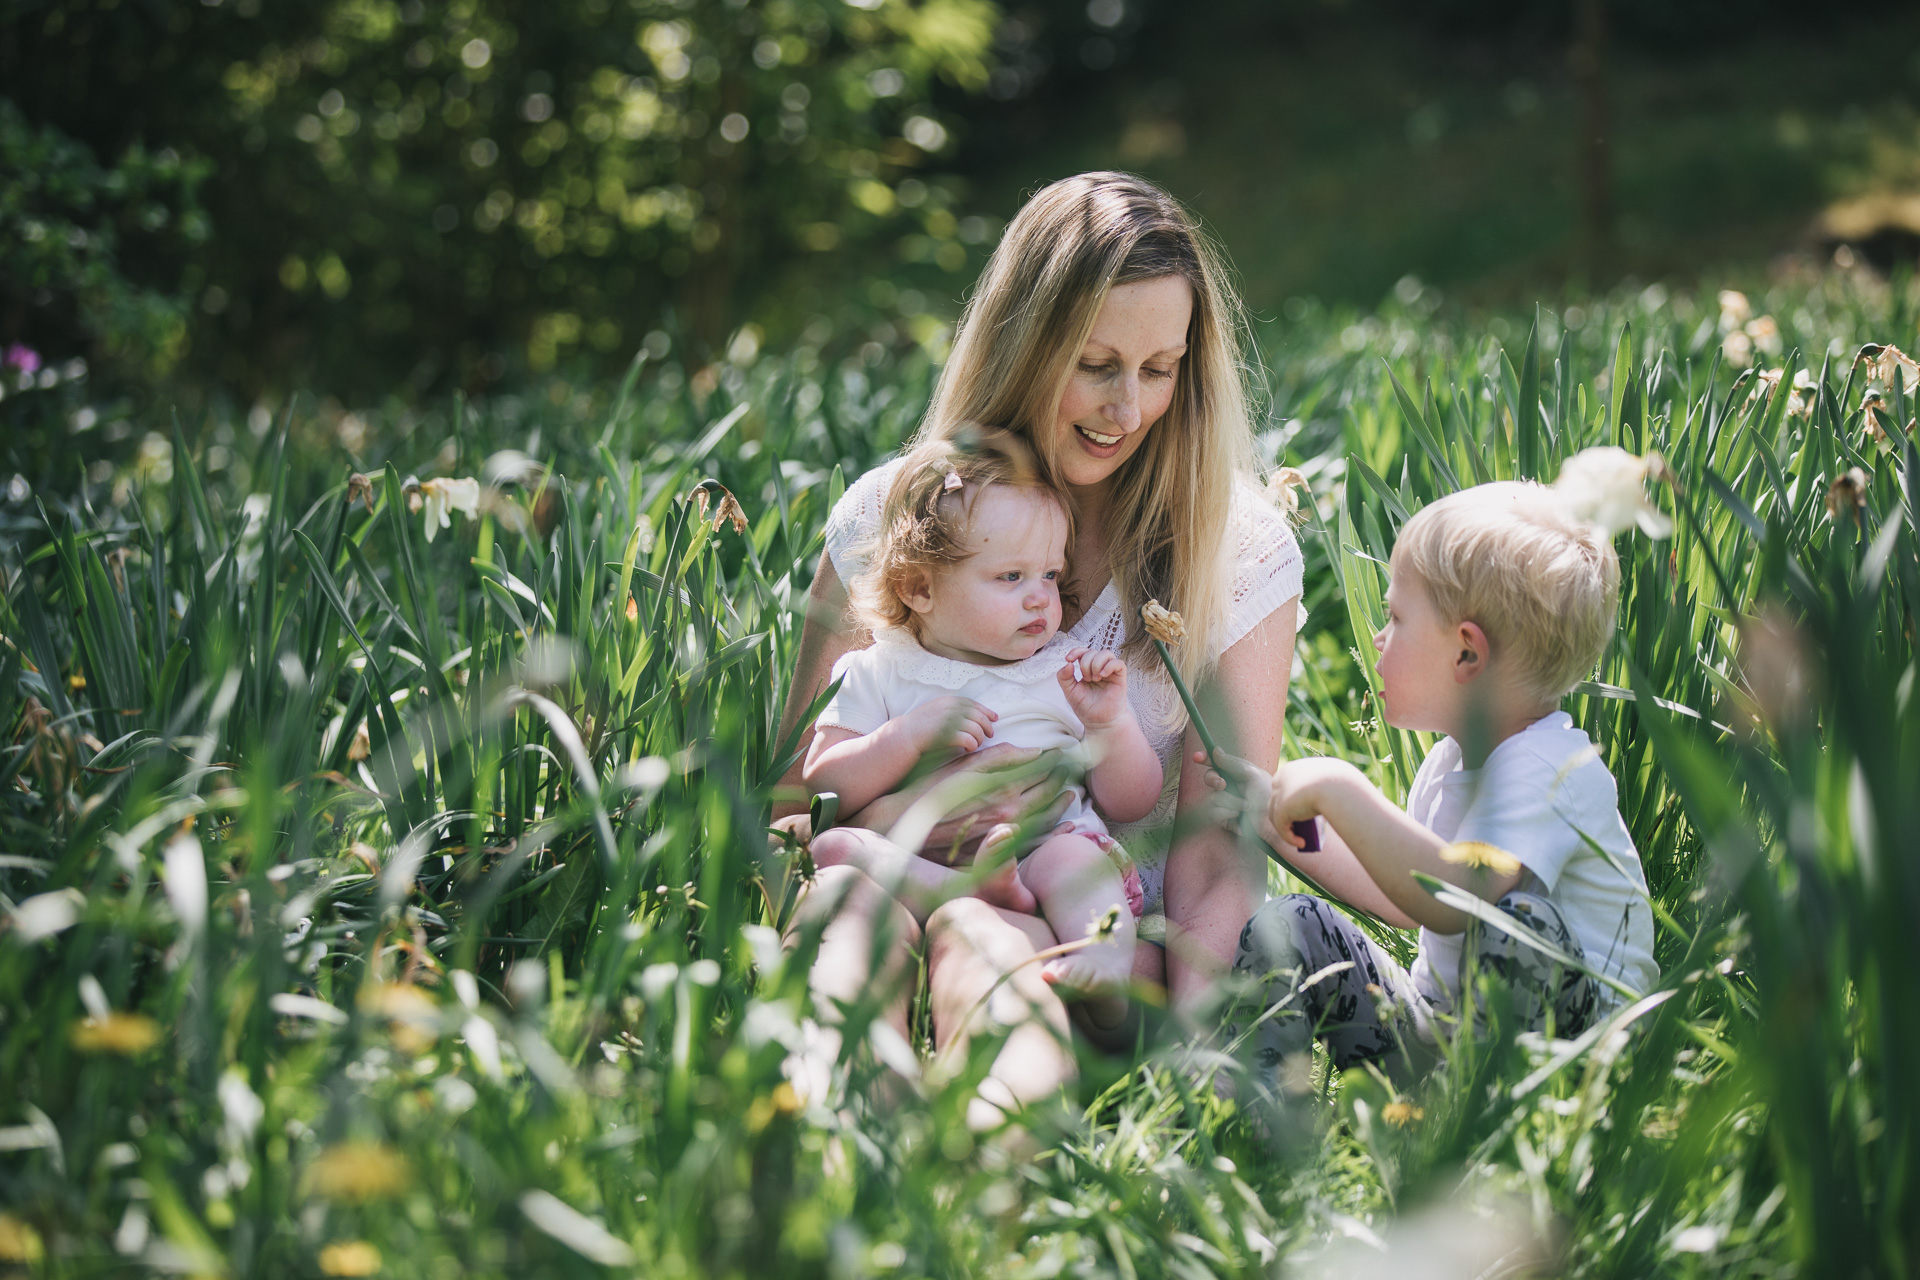 A mother sitting with two children amongst greenery